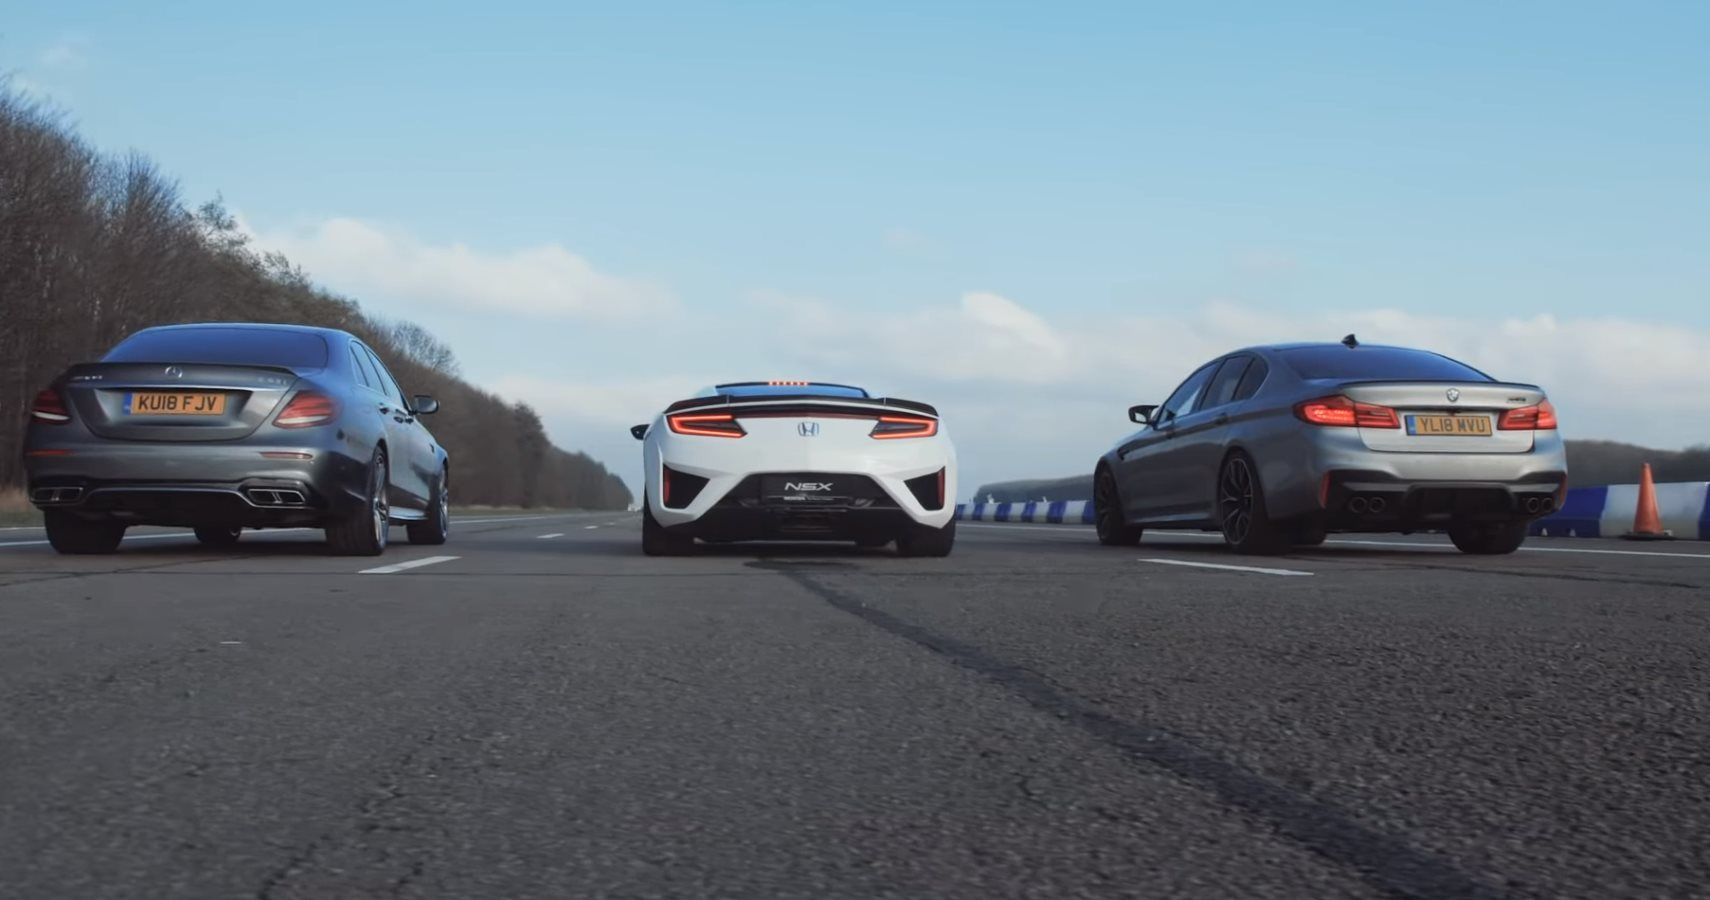 A Honda NSX Takes On BMW M5 And Mercedes-AMG E63 S In Drag Race Action